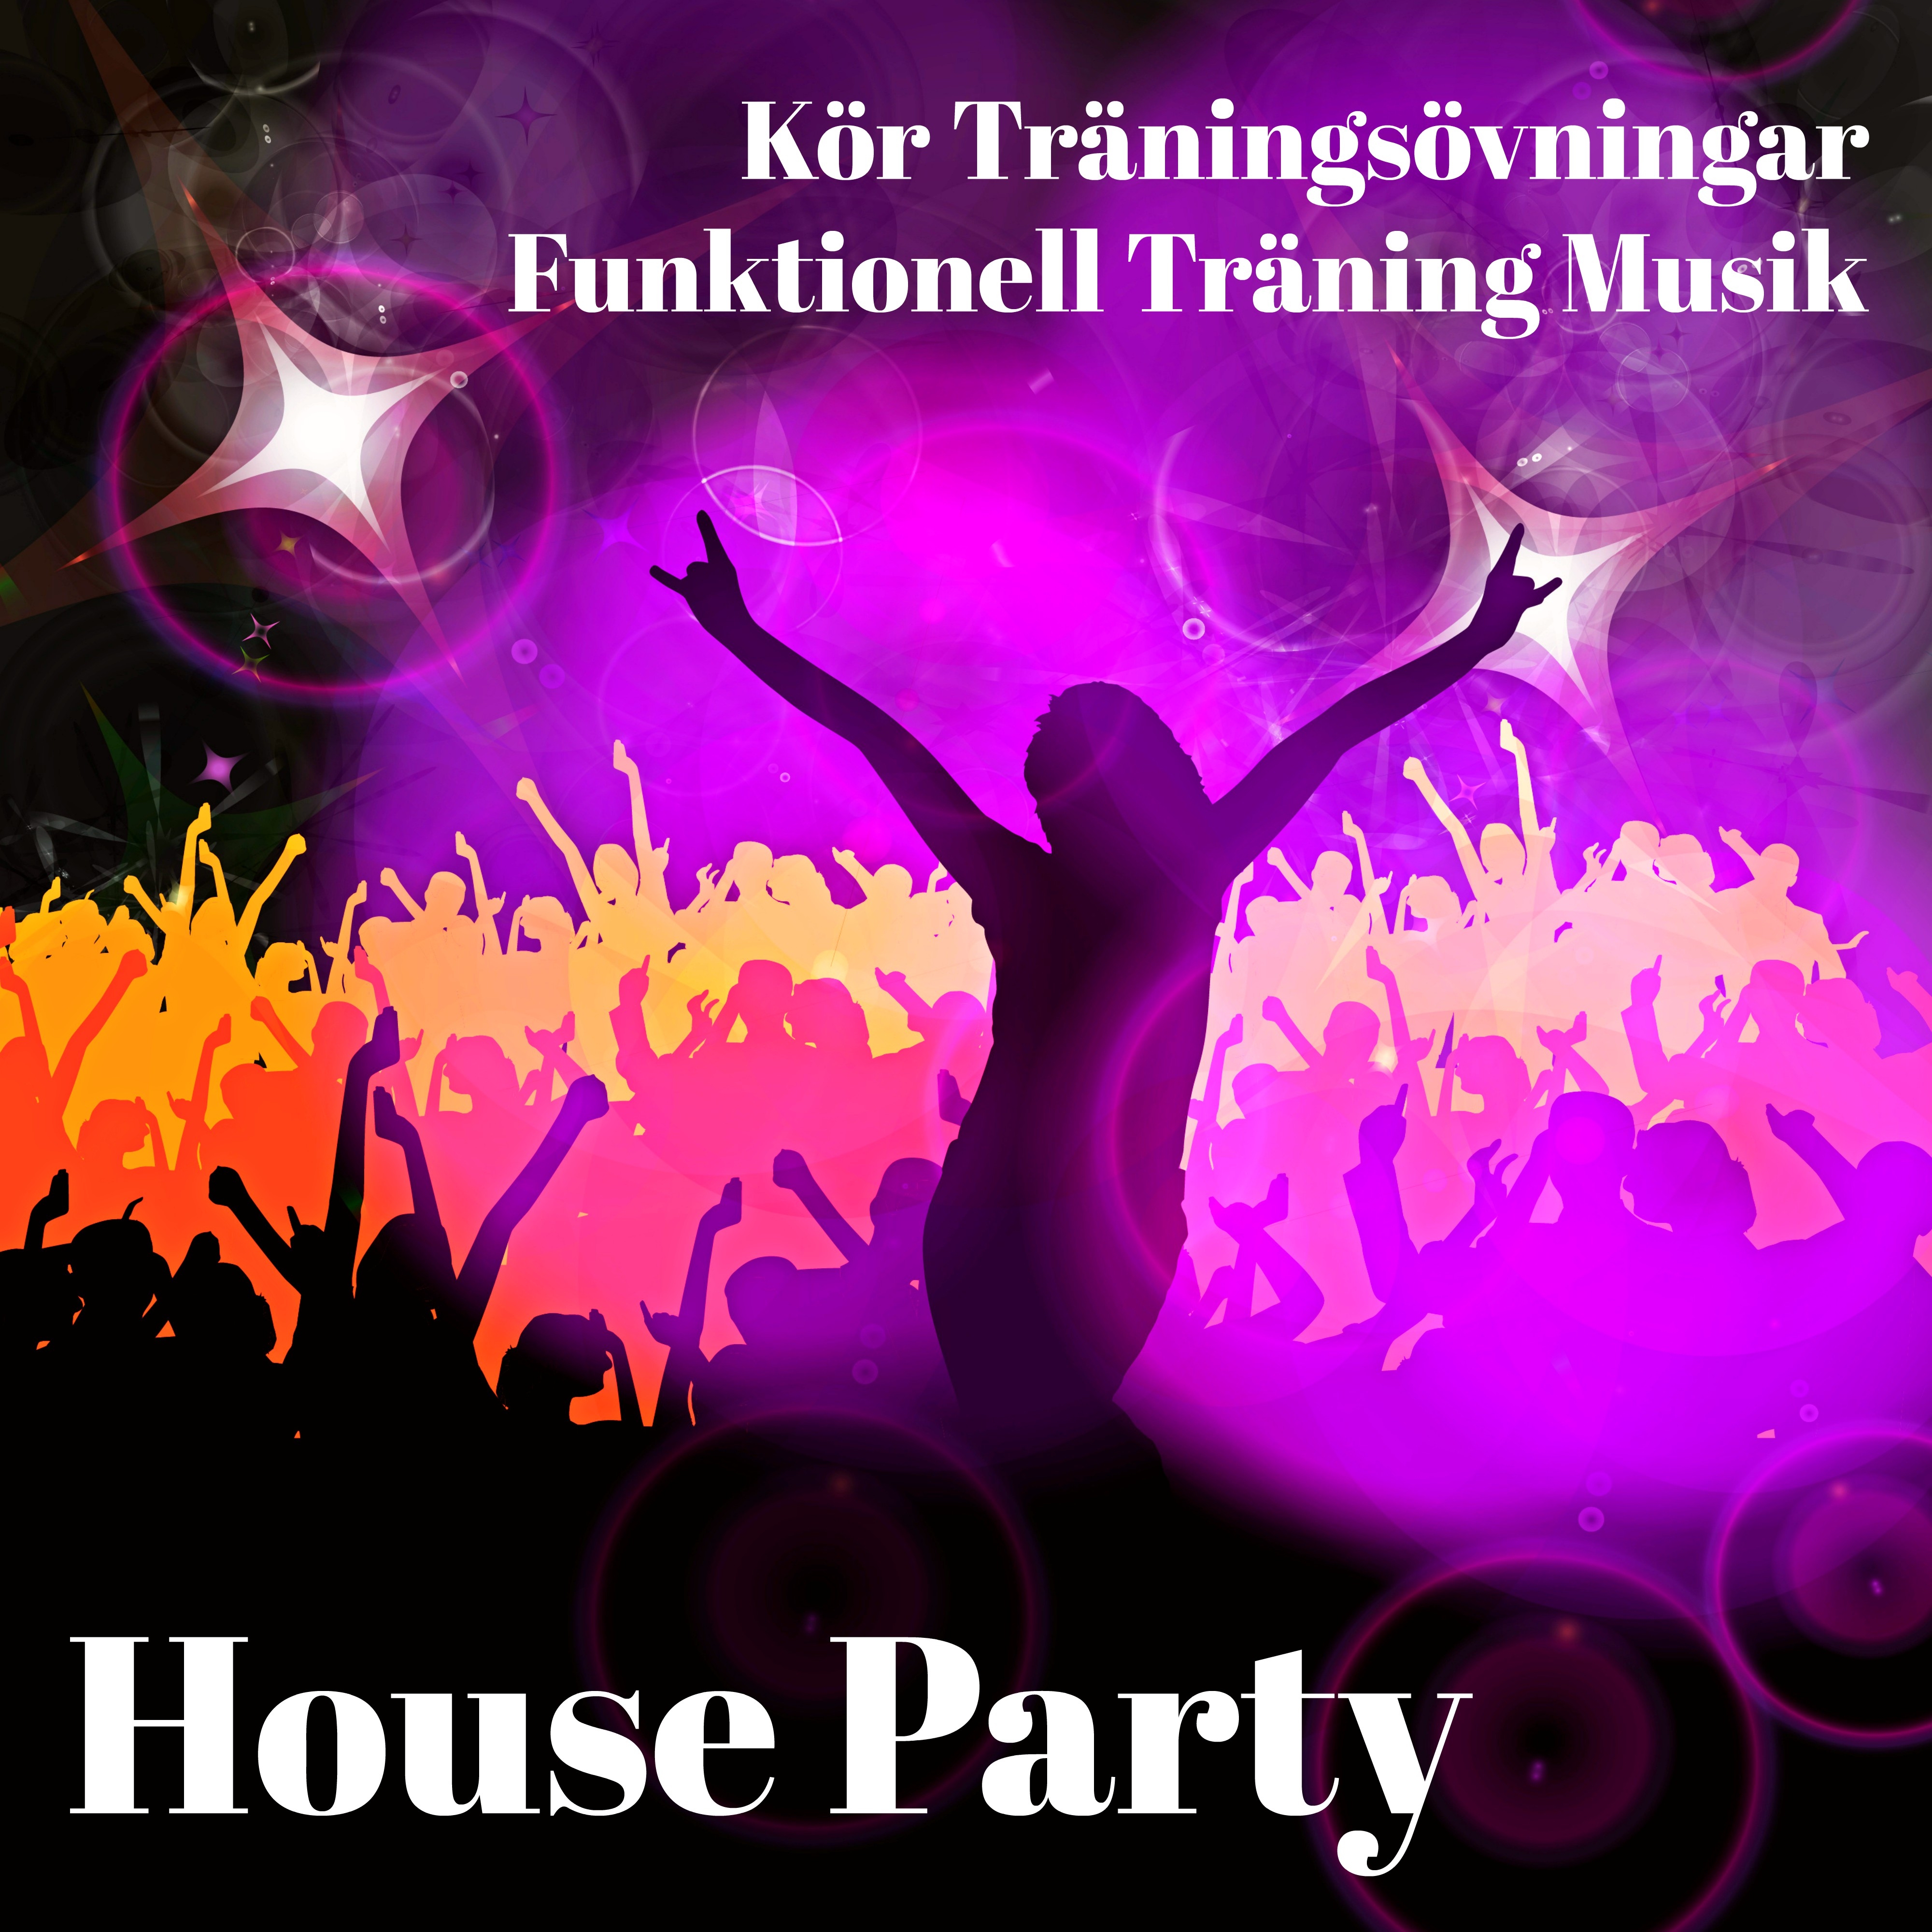 House Party  K r Tr nings vningar Funktionell Tr ning Musik med Chill Lounge Deep House Cardio Dance Ljud